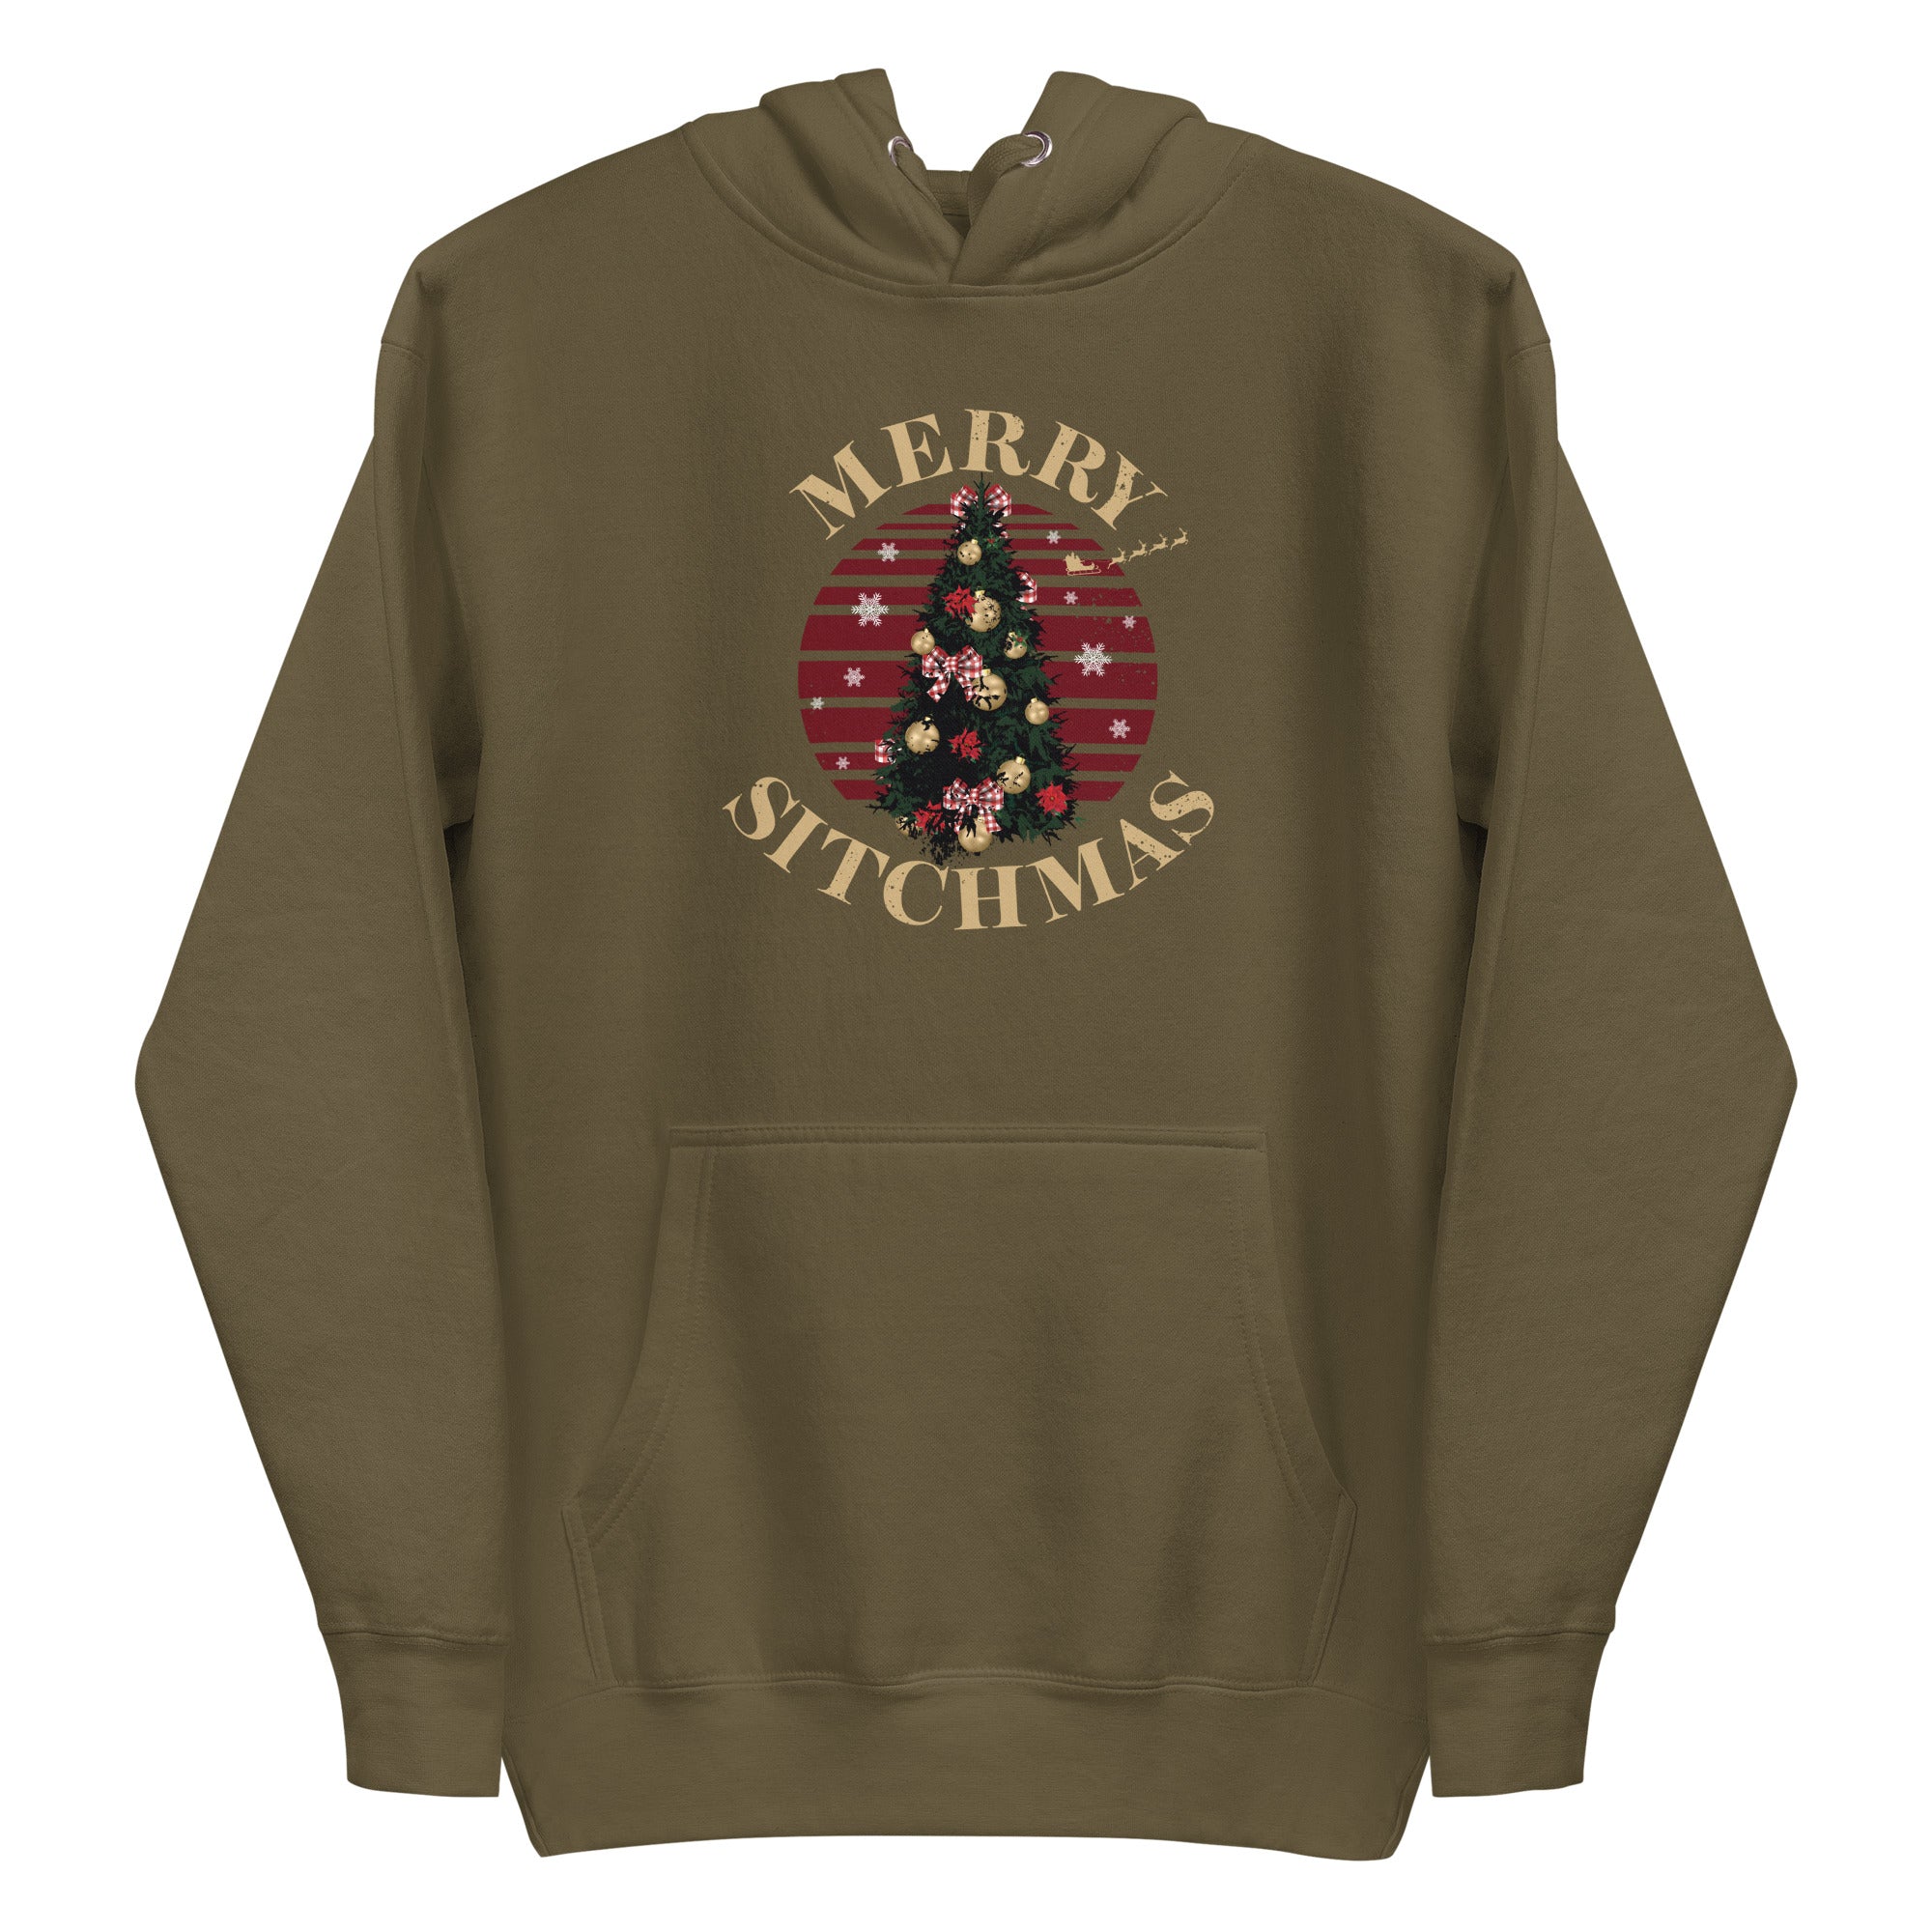 Mike Sorrentino Merry Sitchmas Hoodie